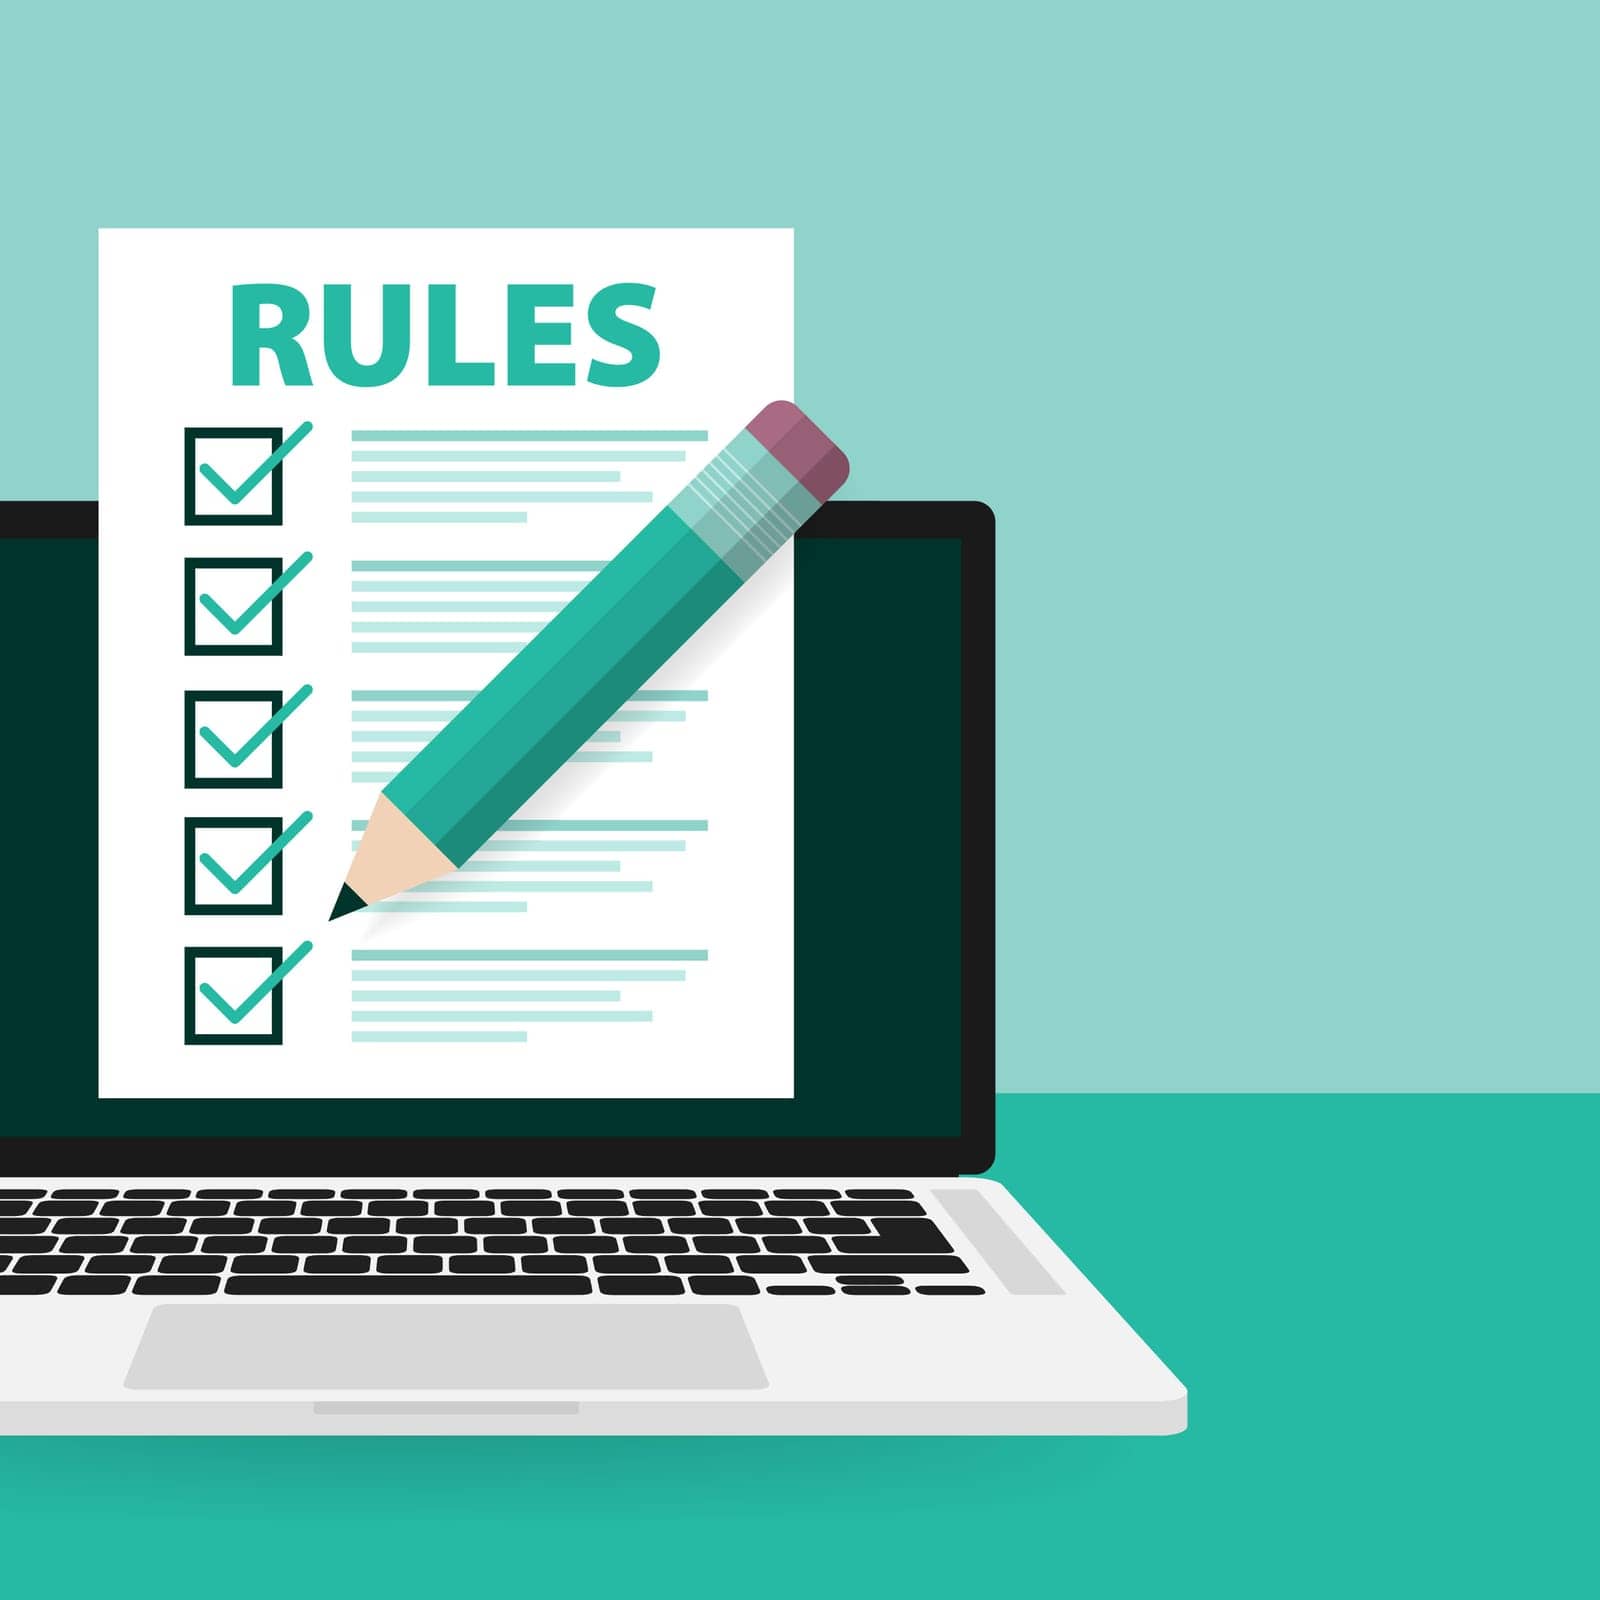 Rules, Checklist with requirements. Principles and strategy. Vector illustration